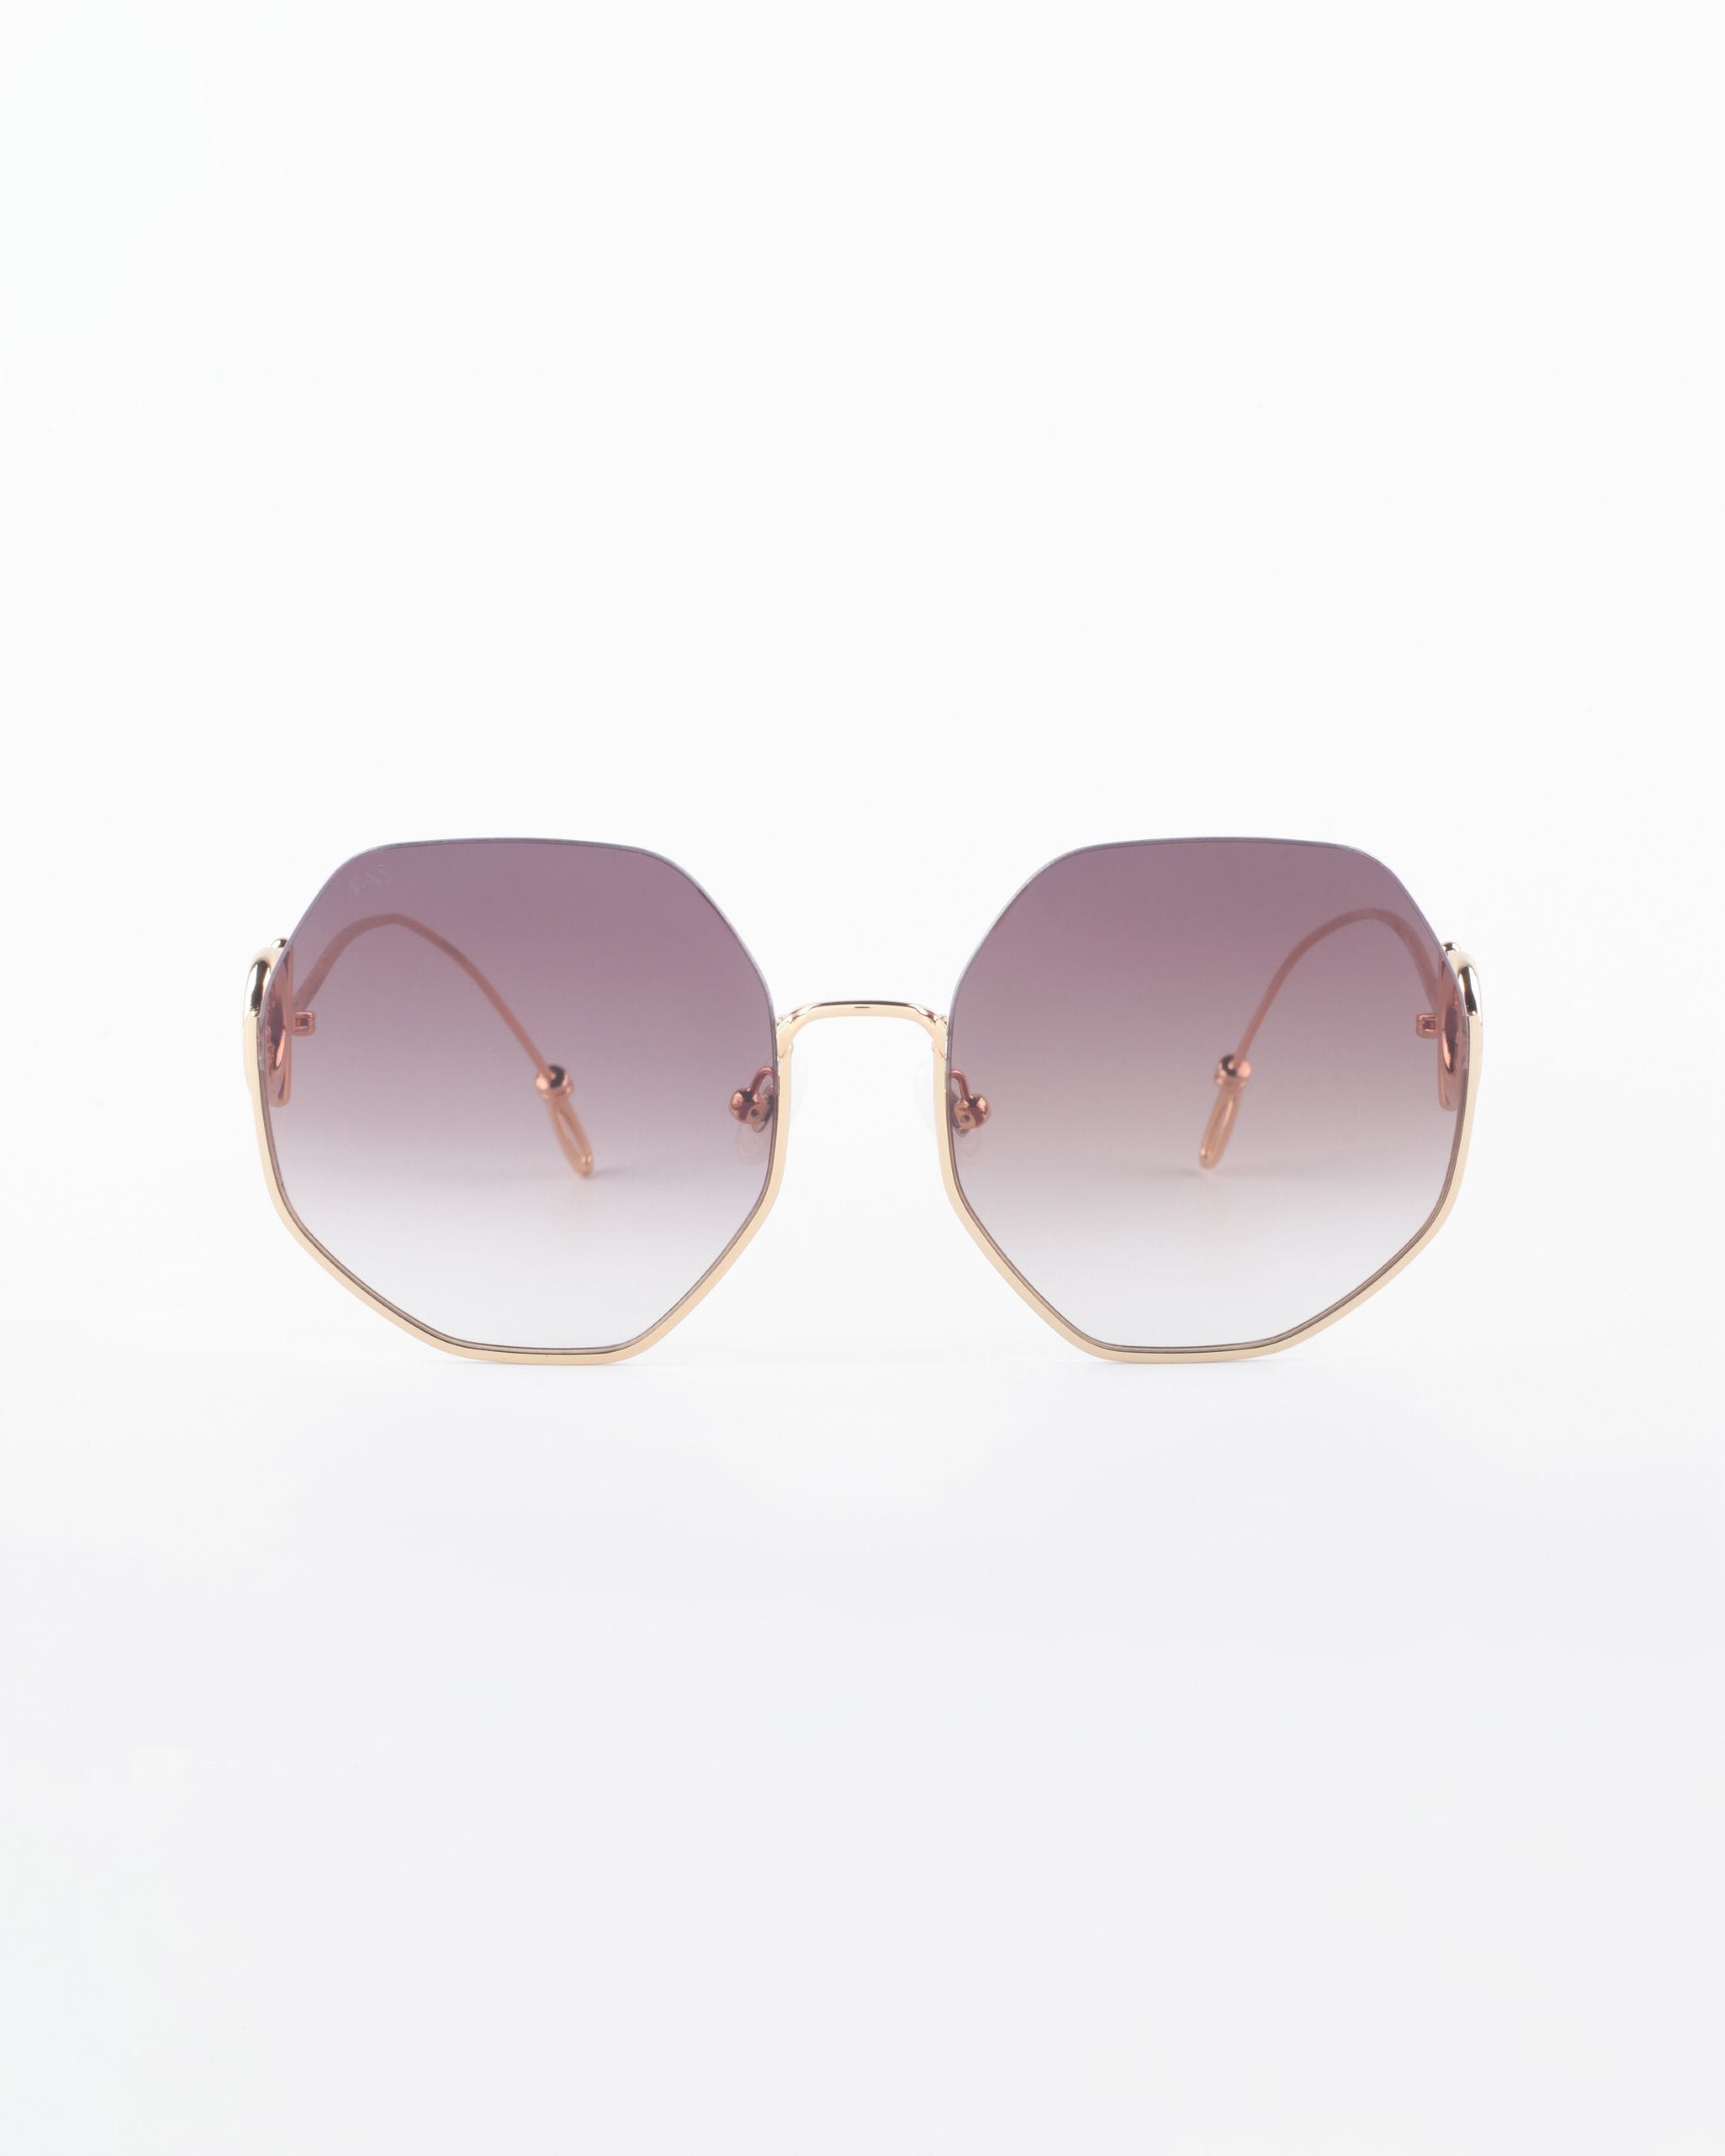 The For Art's Sake® Palace is a pair of sunglasses with geometric, octagonal-shaped lenses. The lenses are gradient, fading from dark purple at the top to lighter hues at the bottom. Featuring thin, gold-colored frames and arms, they are also UVA & UVB-protected for optimal eye safety.